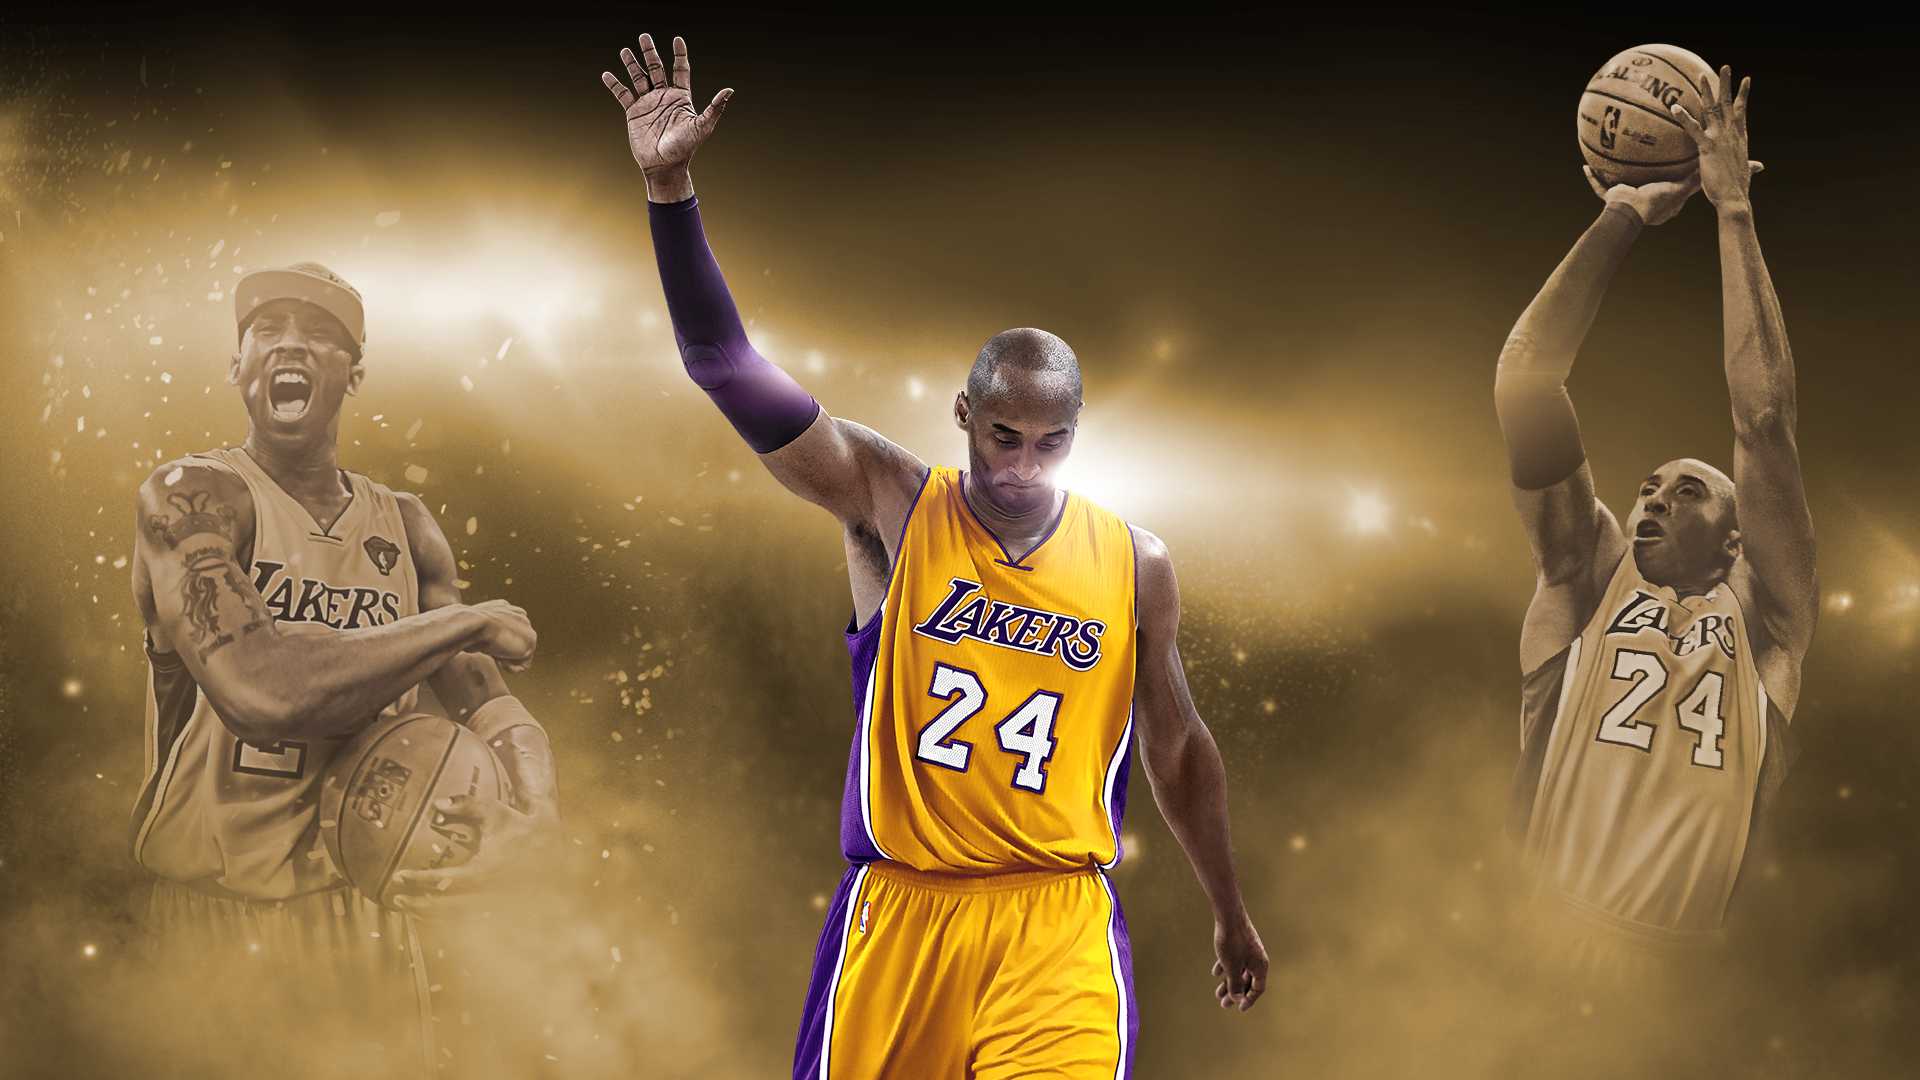 nba star kobe bryant dead at 41 communities from 2k and ea sports share condolences online min